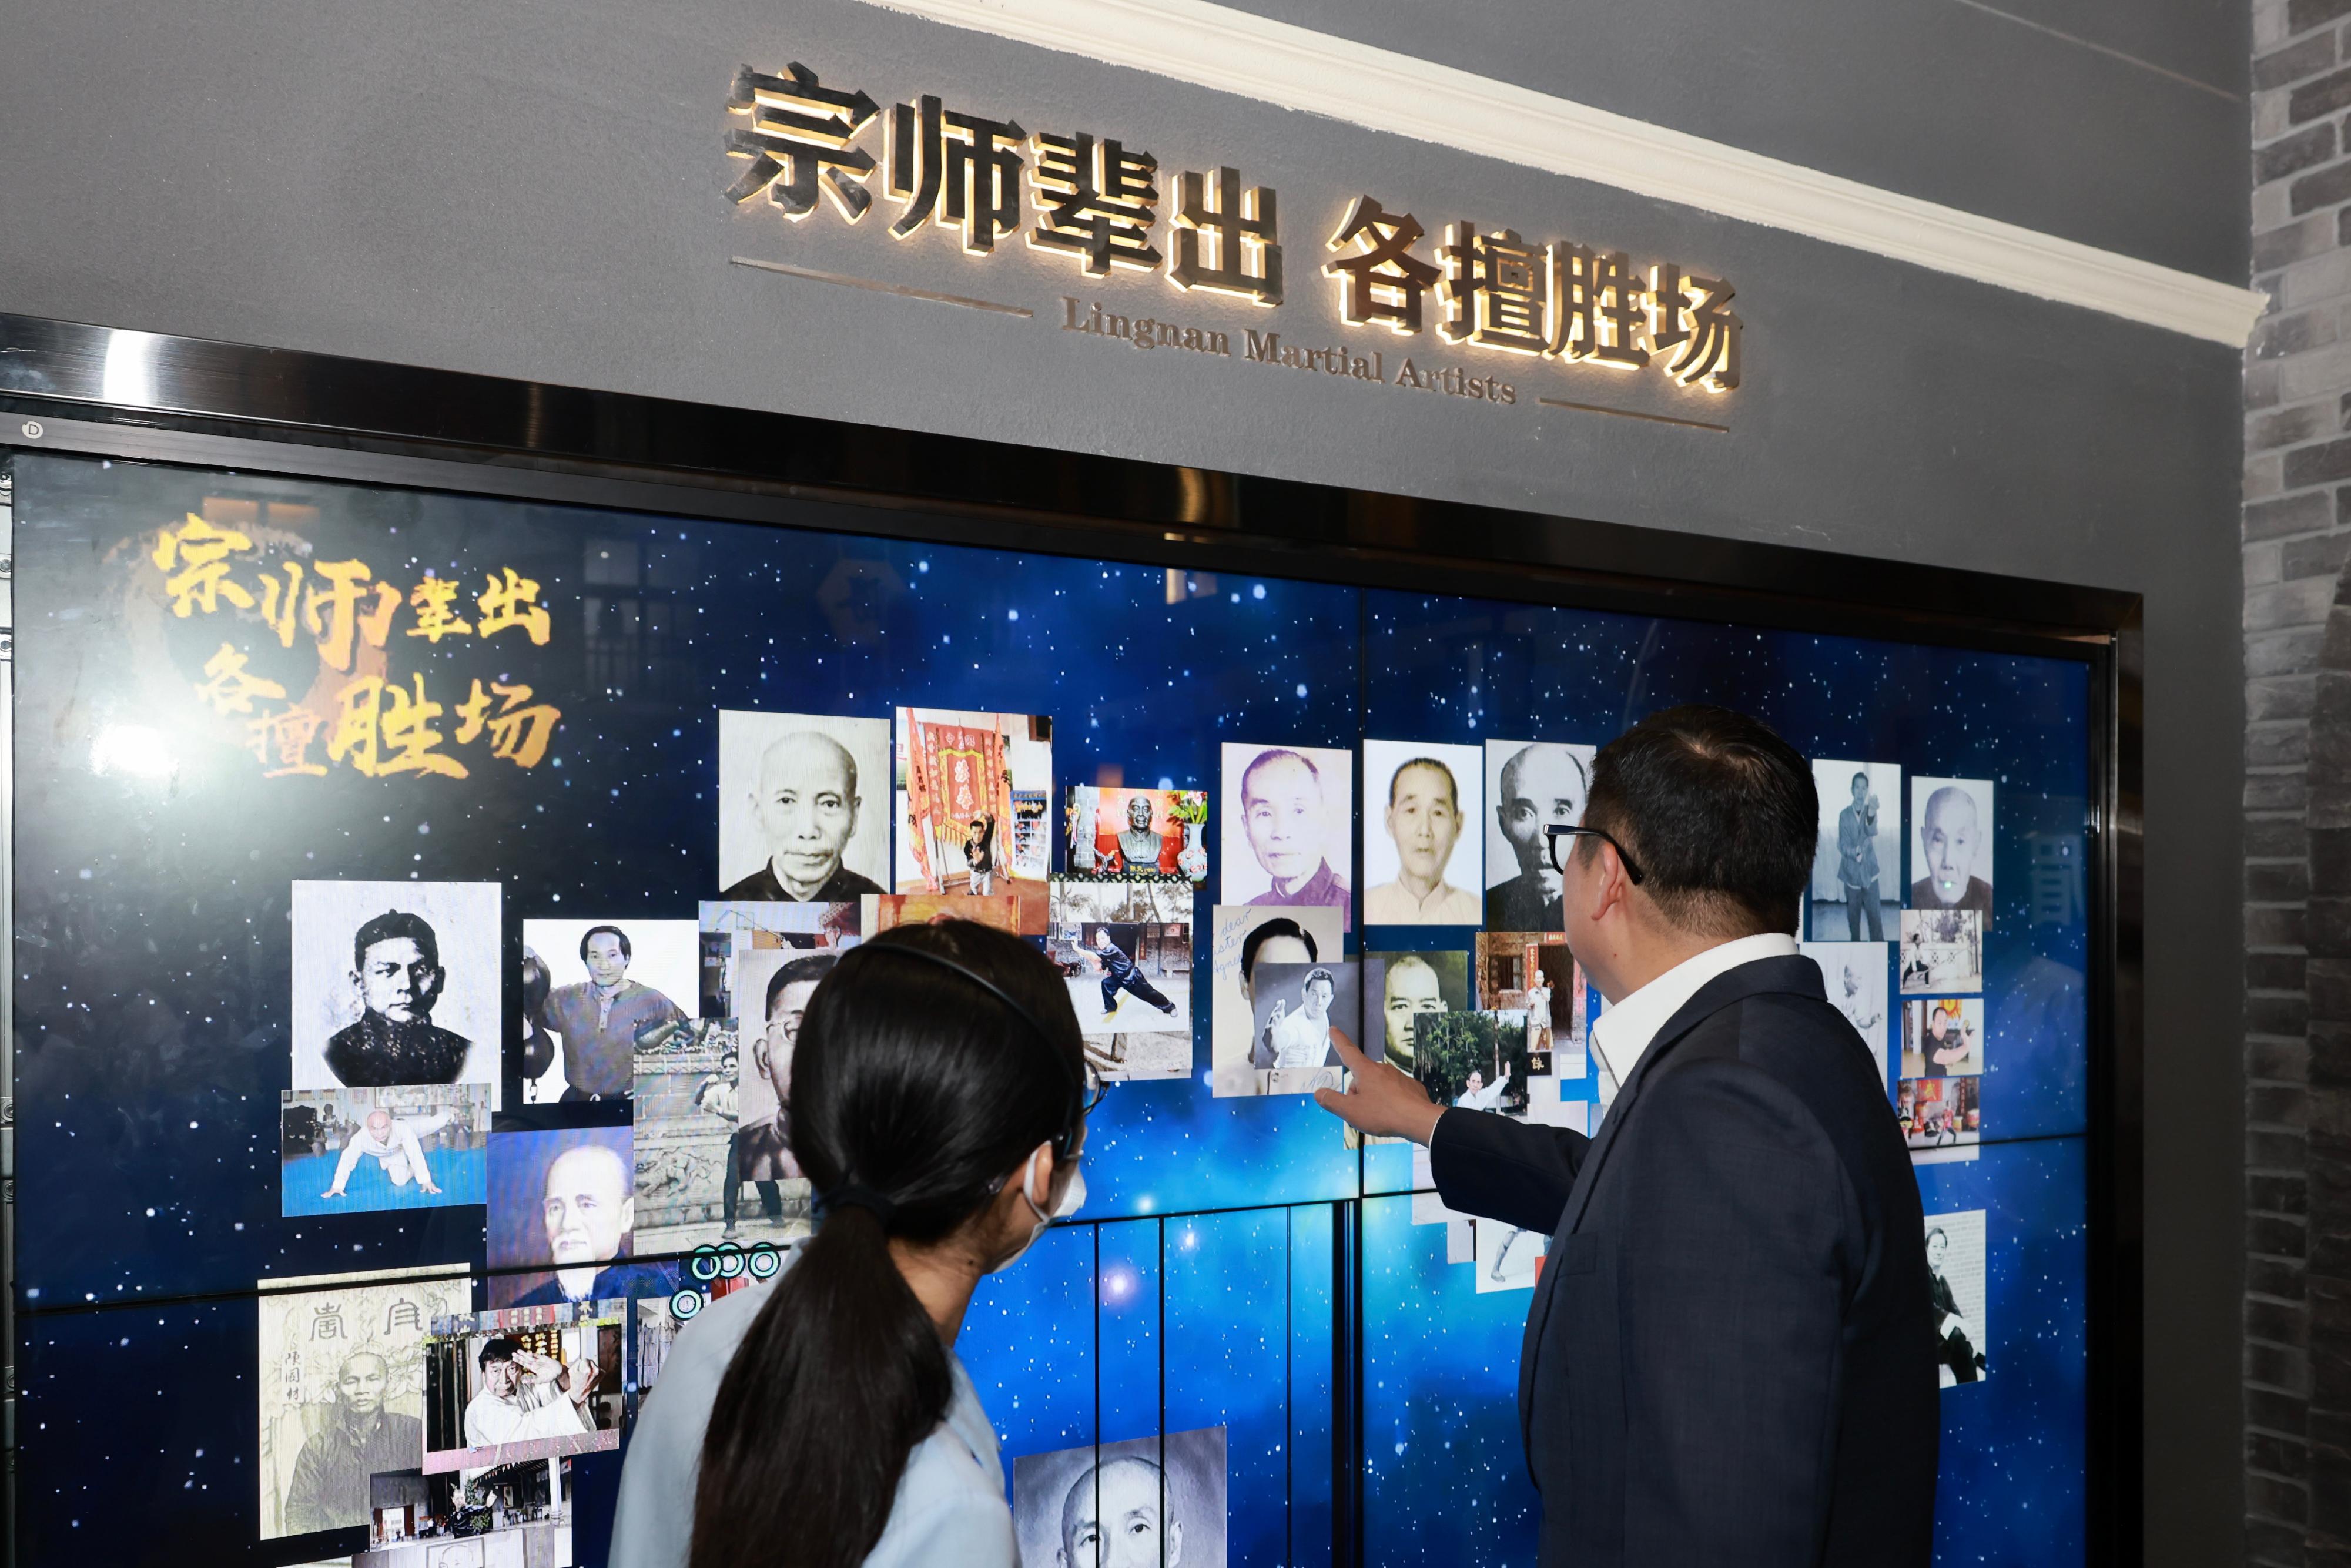 The Secretary for Security, Mr Tang Ping-keung, today (July 20) completed his series of visits to all cities of the Guangdong-Hong Kong-Macao Greater Bay Area in recent months. Photo shows Mr Tang (right) visiting the Feihong Pavilion in Nanhai, Foshan, and learning more about the origin, inheritance and development of Foshan's martial arts culture.